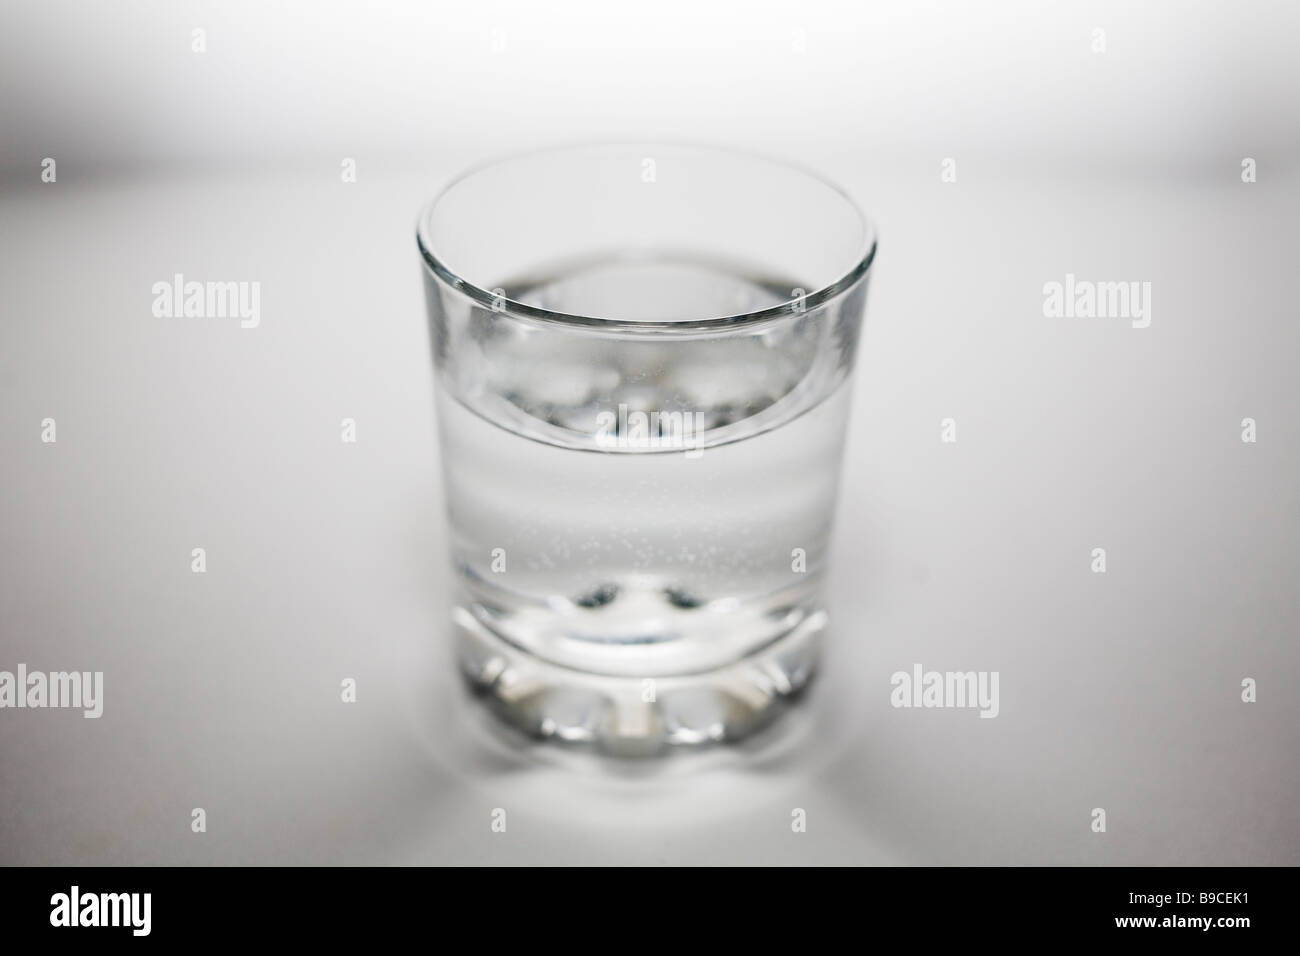 A glass of water. Stock Photo